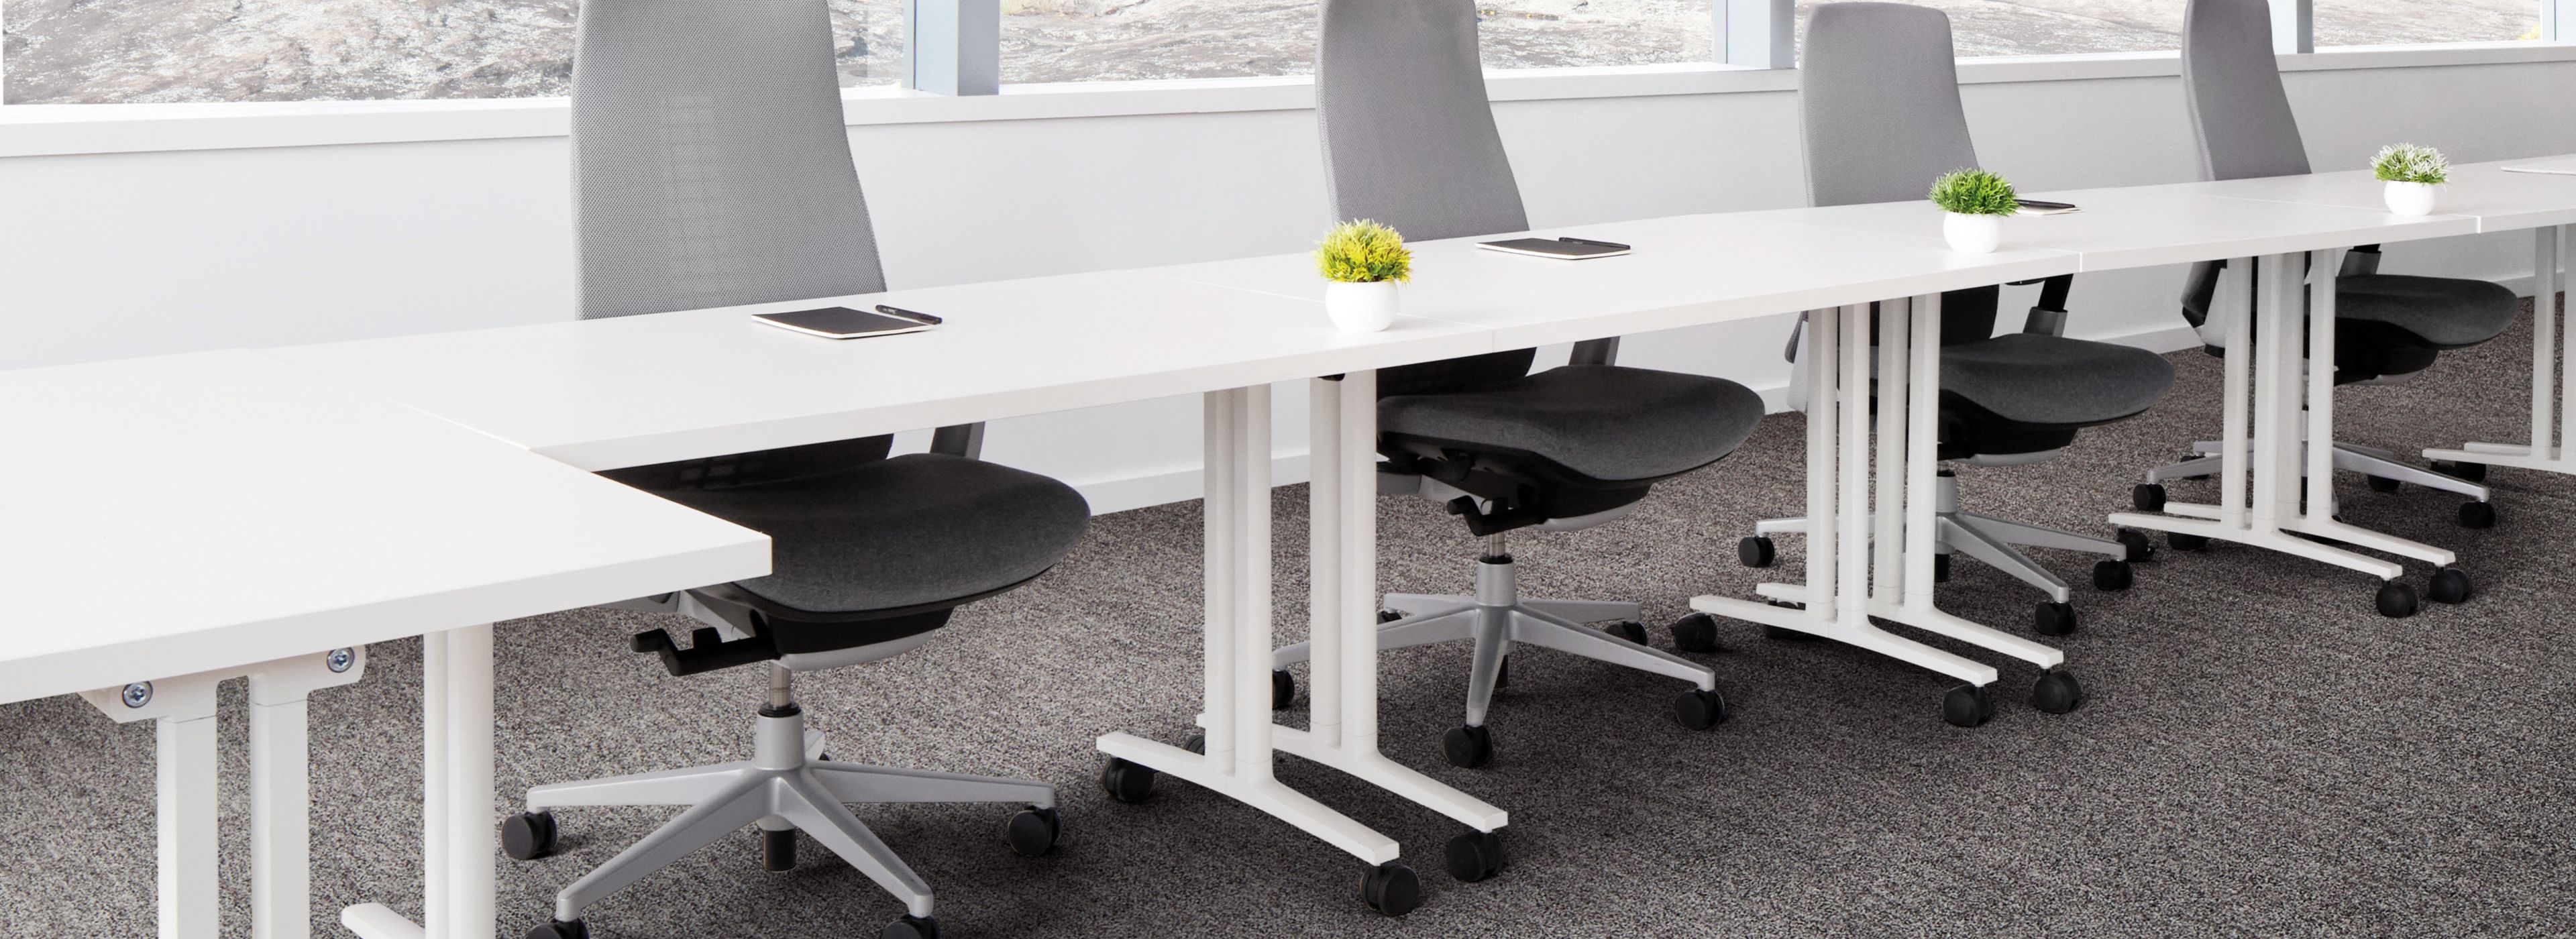 Interface Mantle Rock plank carpet tile in meeting room with white table numéro d’image 1